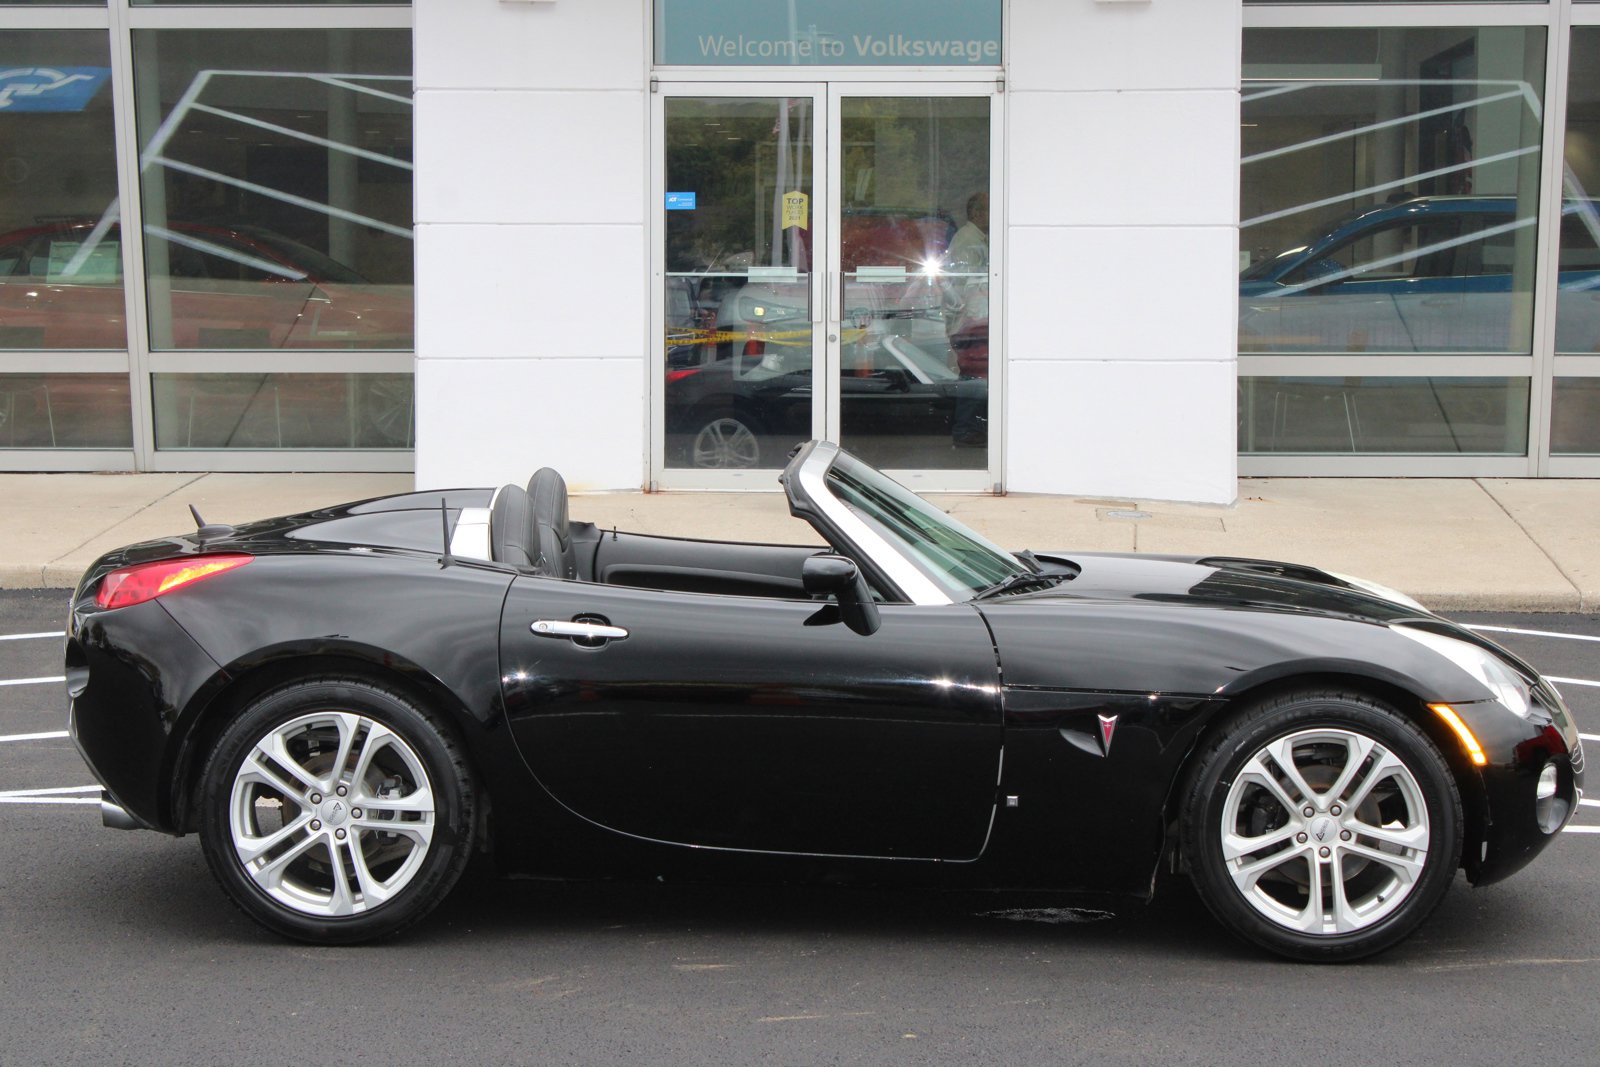 Used 2007 Pontiac Solstice  with VIN 1G2MB35B17Y105895 for sale in Perrysburg, OH